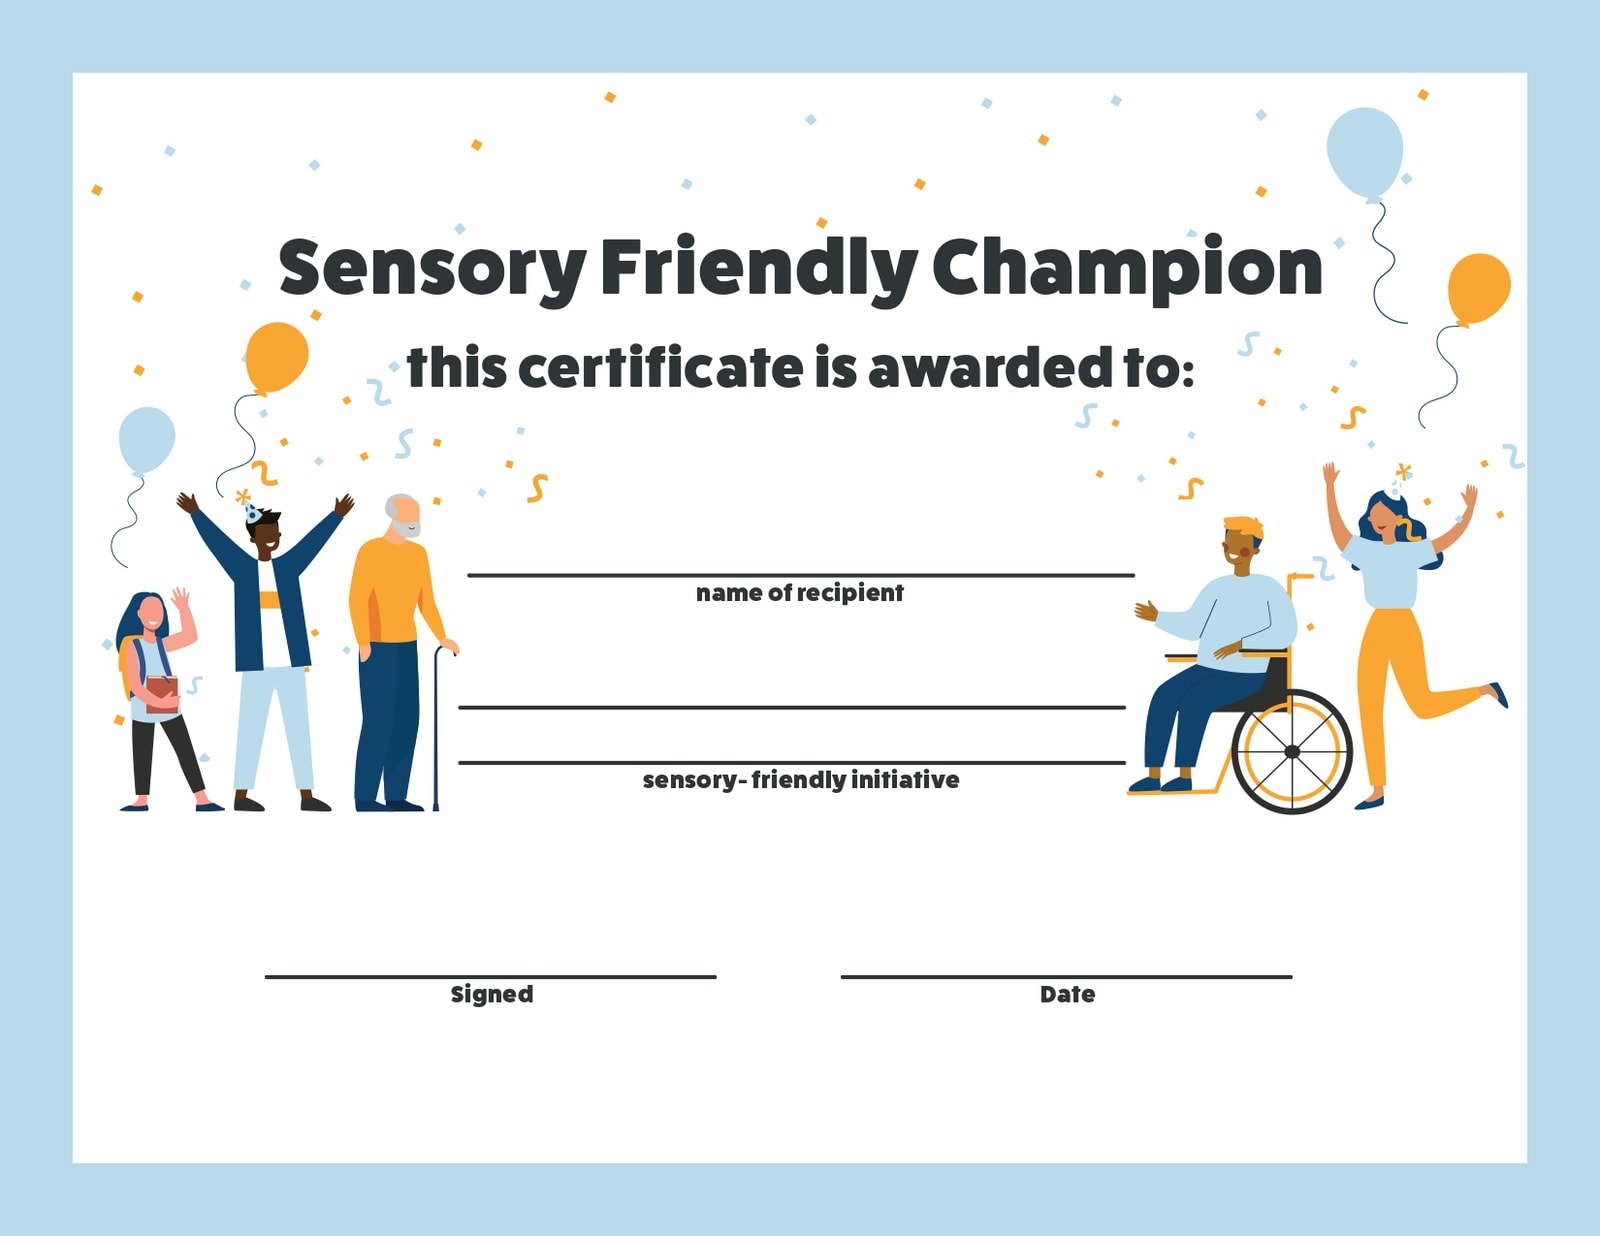 Sensory-Friendly Champion Certificate with the words "this certificate is awarded to"